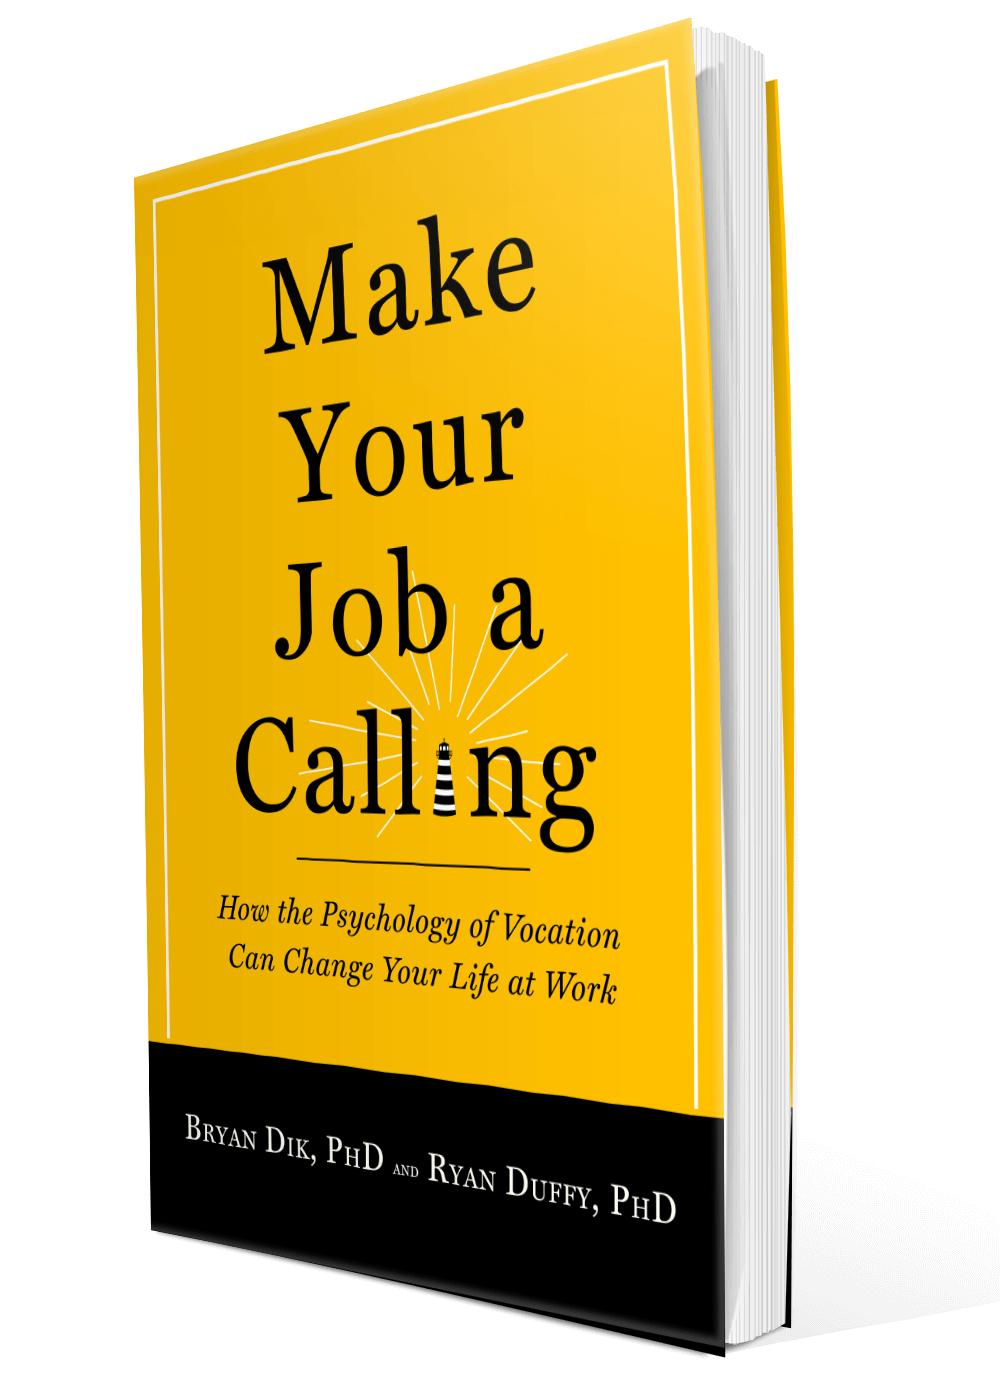 Make Your Job a Calling: How the Psychology of Vocation Can Change Your Life at Work by Brian Dik, PhD and Ryan Duffy, PhD